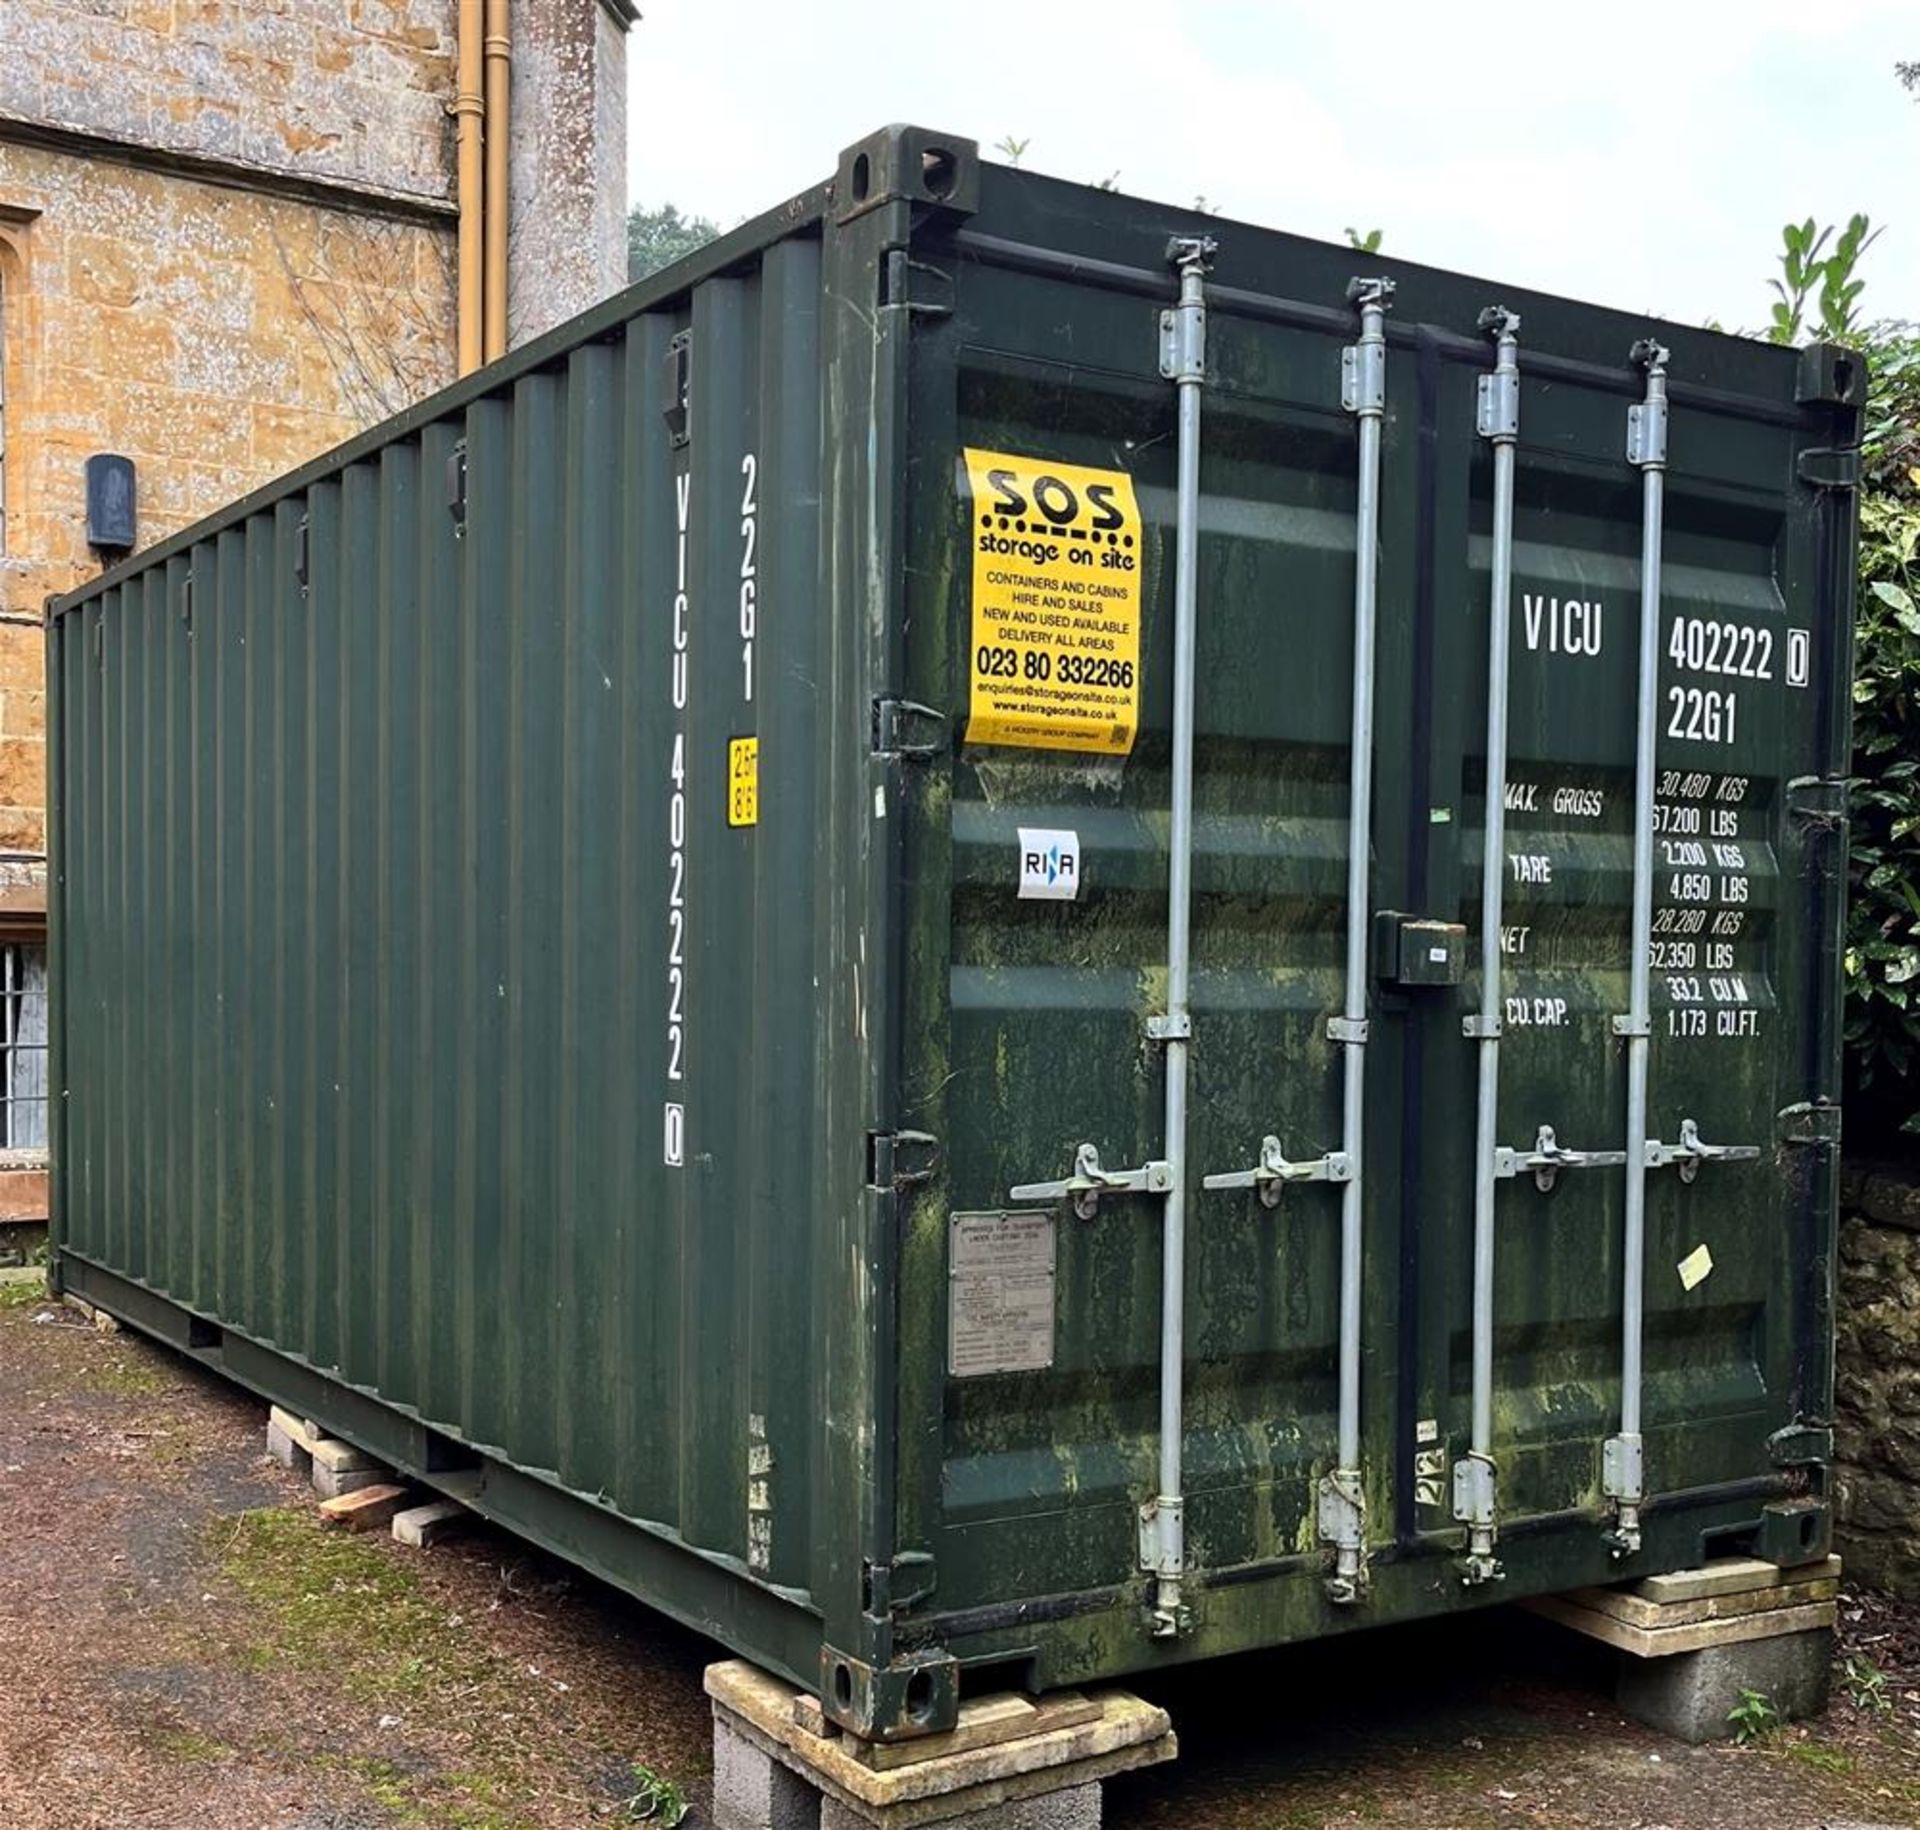 ONE LARGE SHIPPING CONTAINER 30,480kgs 67,200lbs 1,173cubic feet